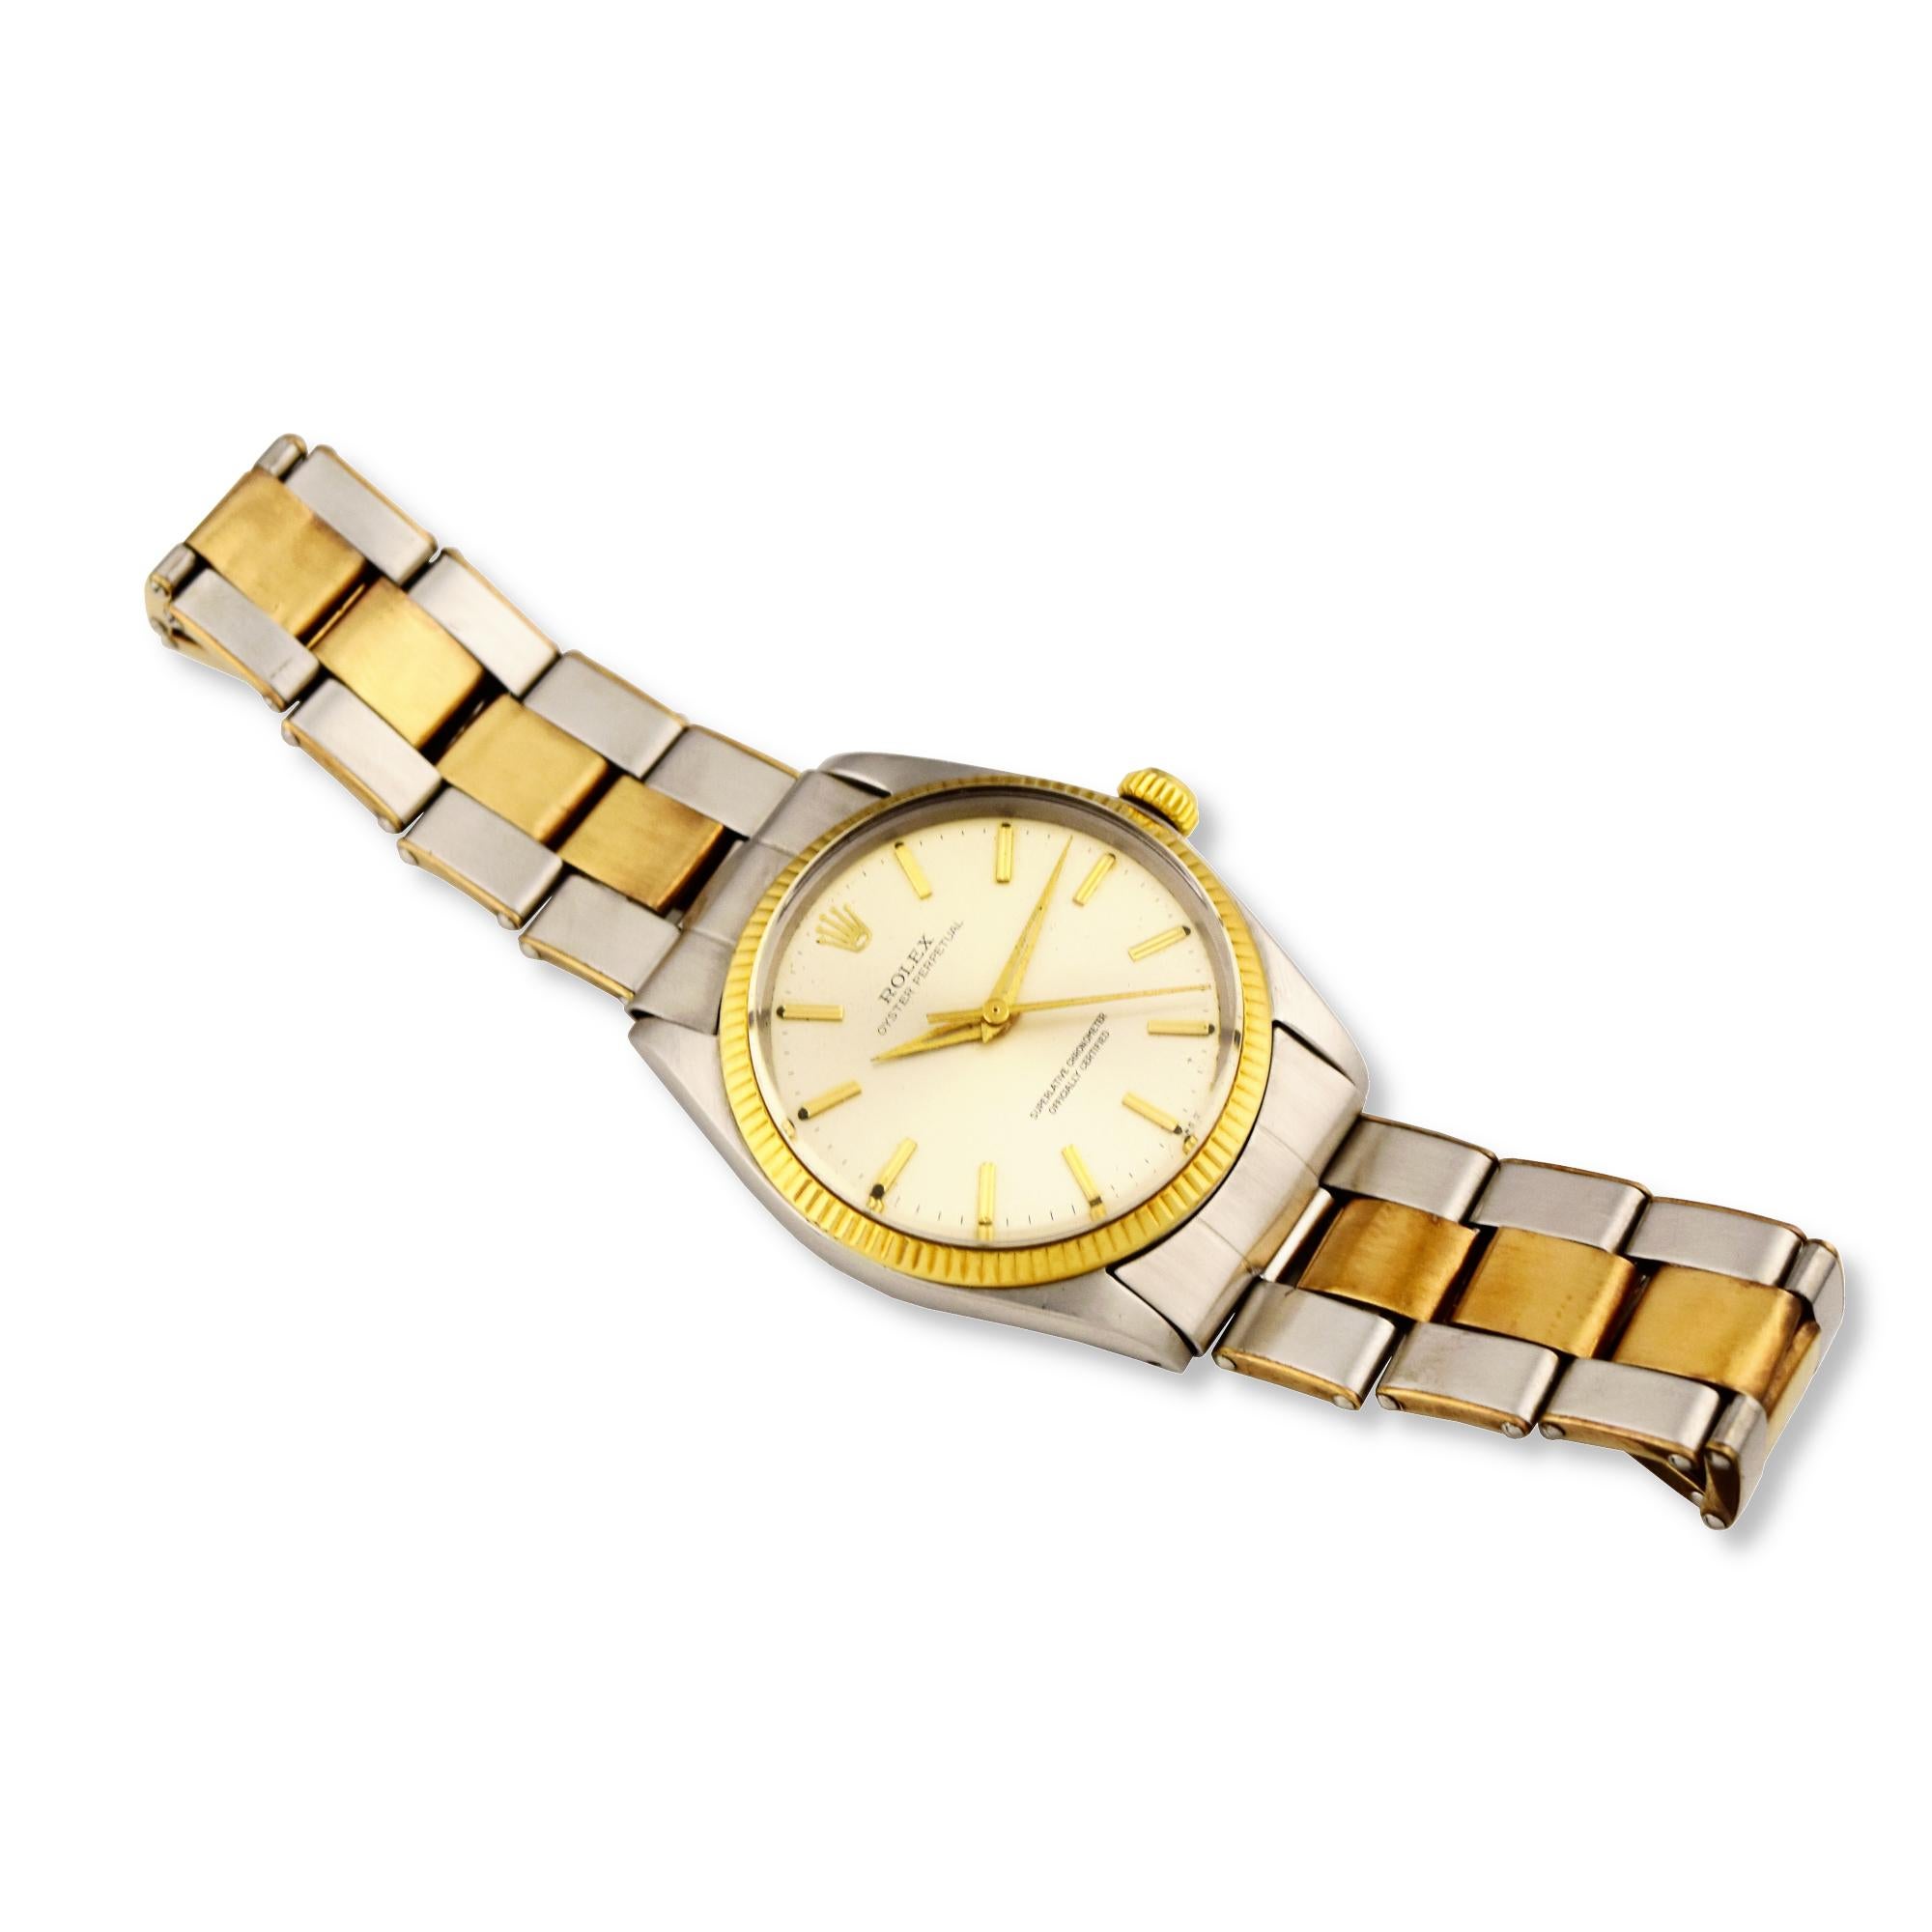 Women's or Men's Rolex Oyster Perpetual Ref.1005 Two-Tone Watch